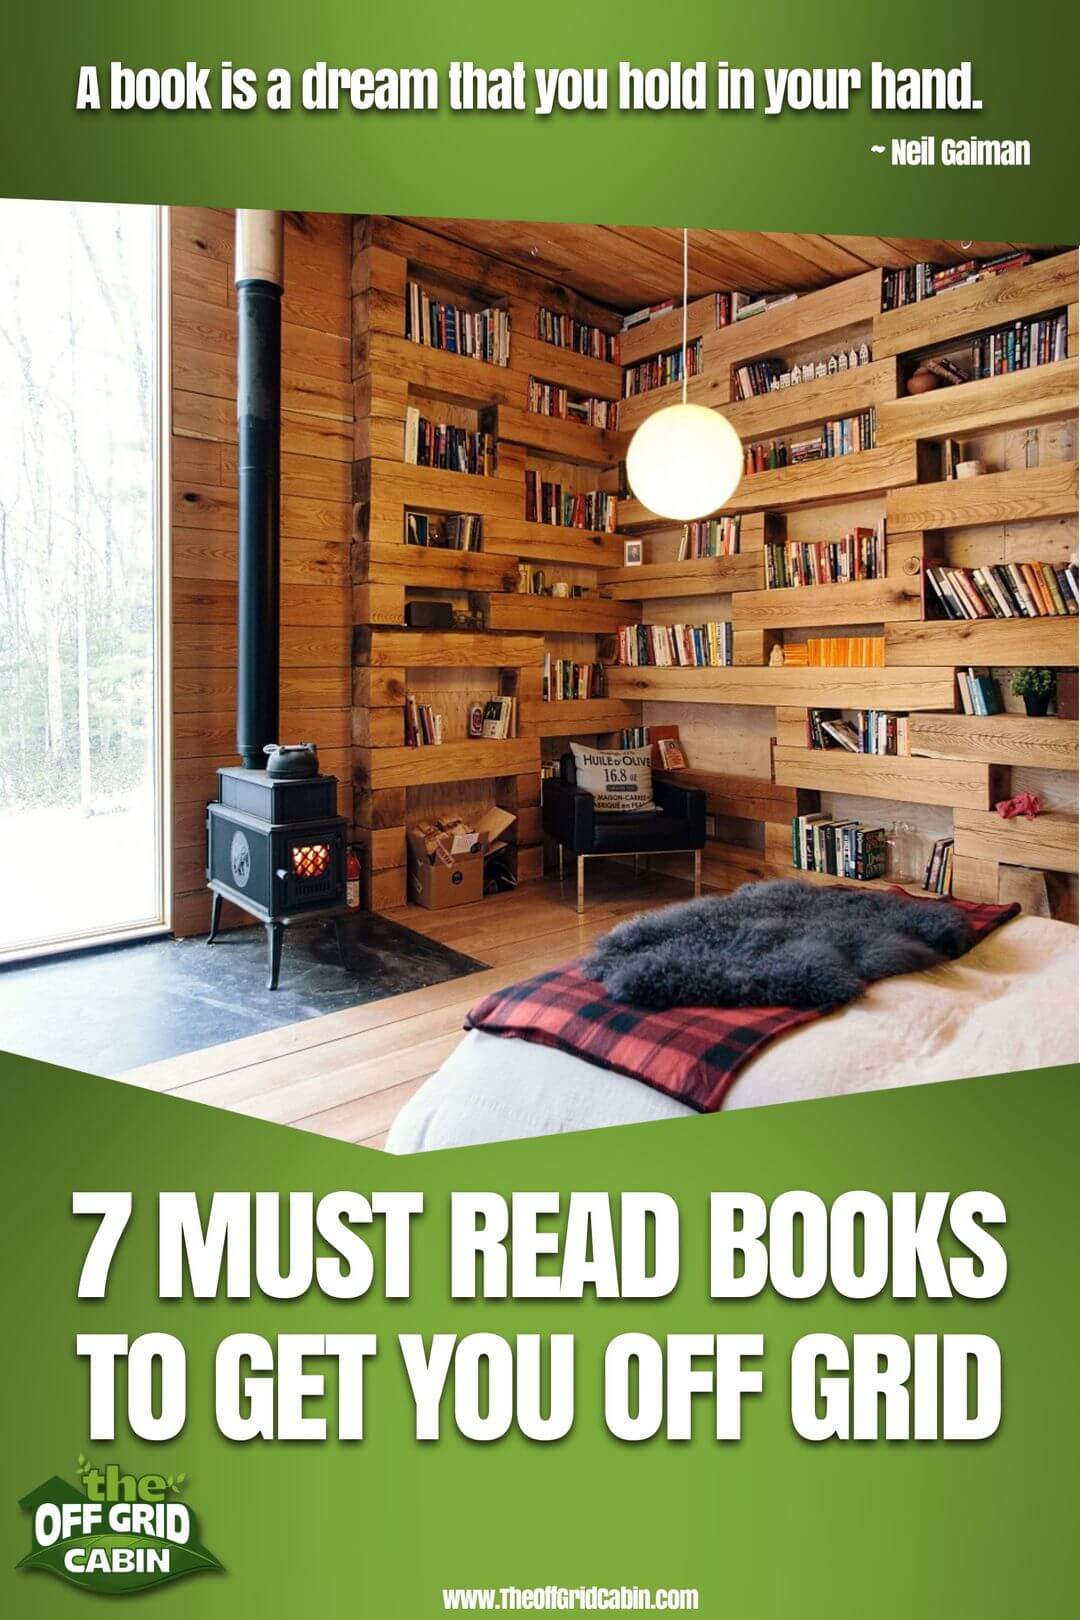 7 must read books to get you off grid